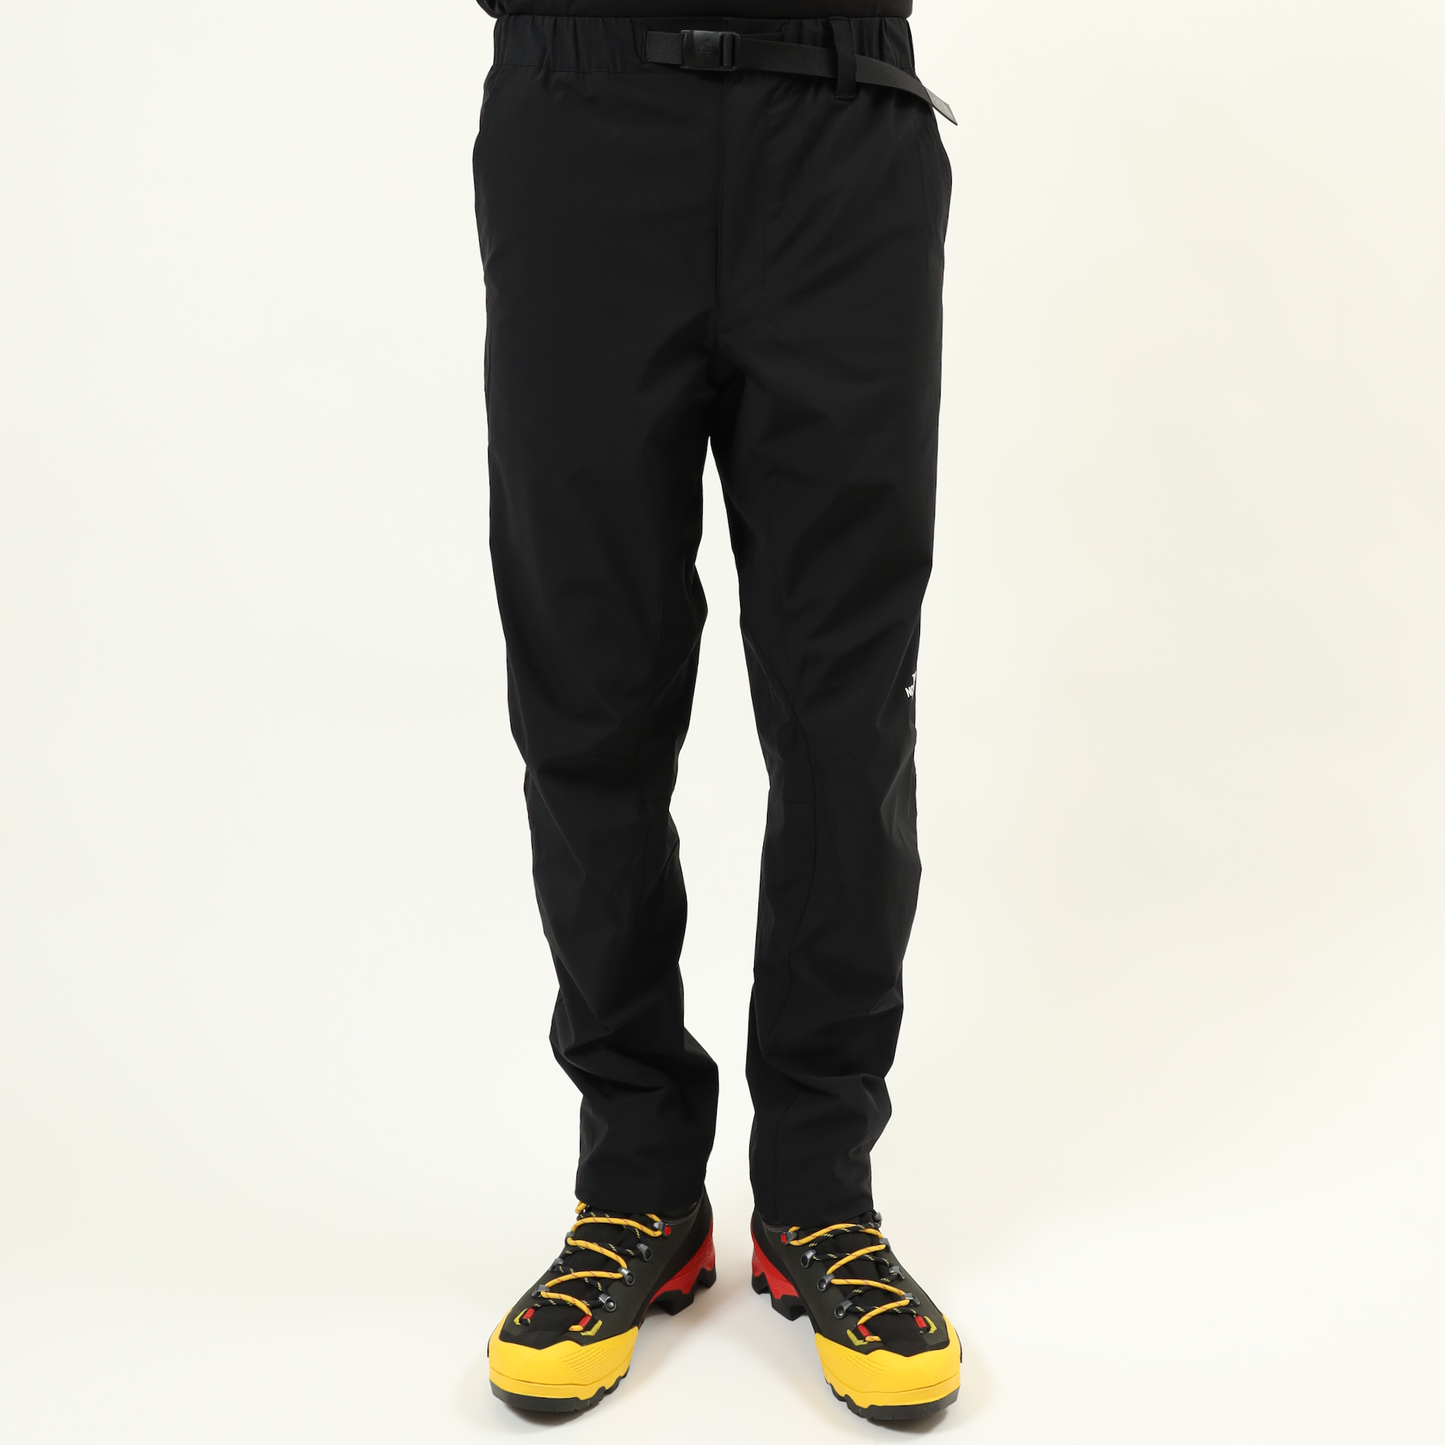 【THE NORTH FACE】Verb Light Pant